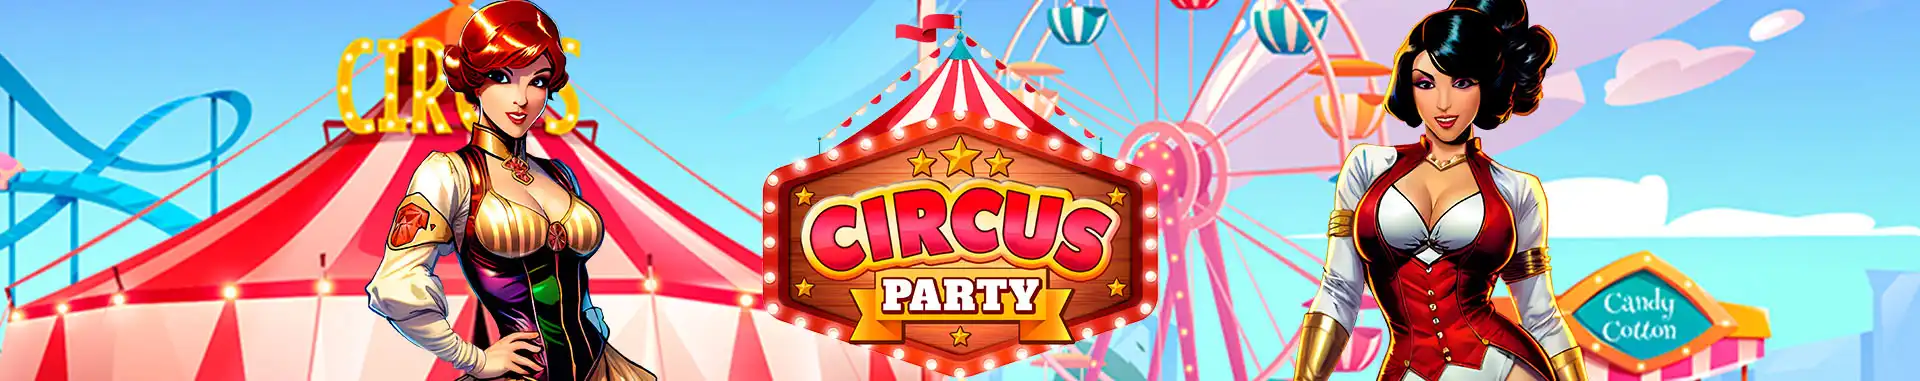 Tragaperras online Circus Party